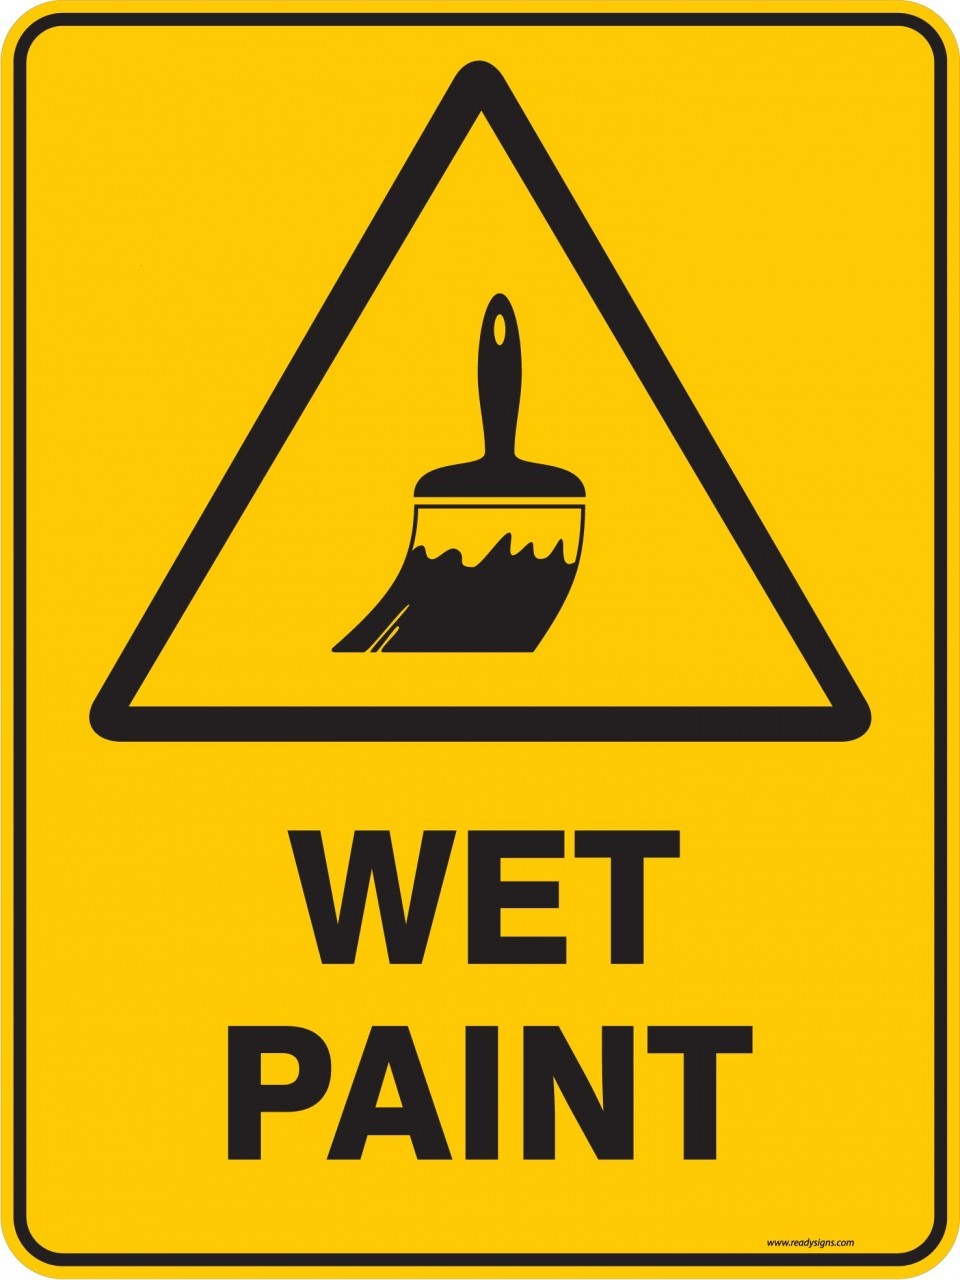 Warning Sign - WET PAINT - Property Signs